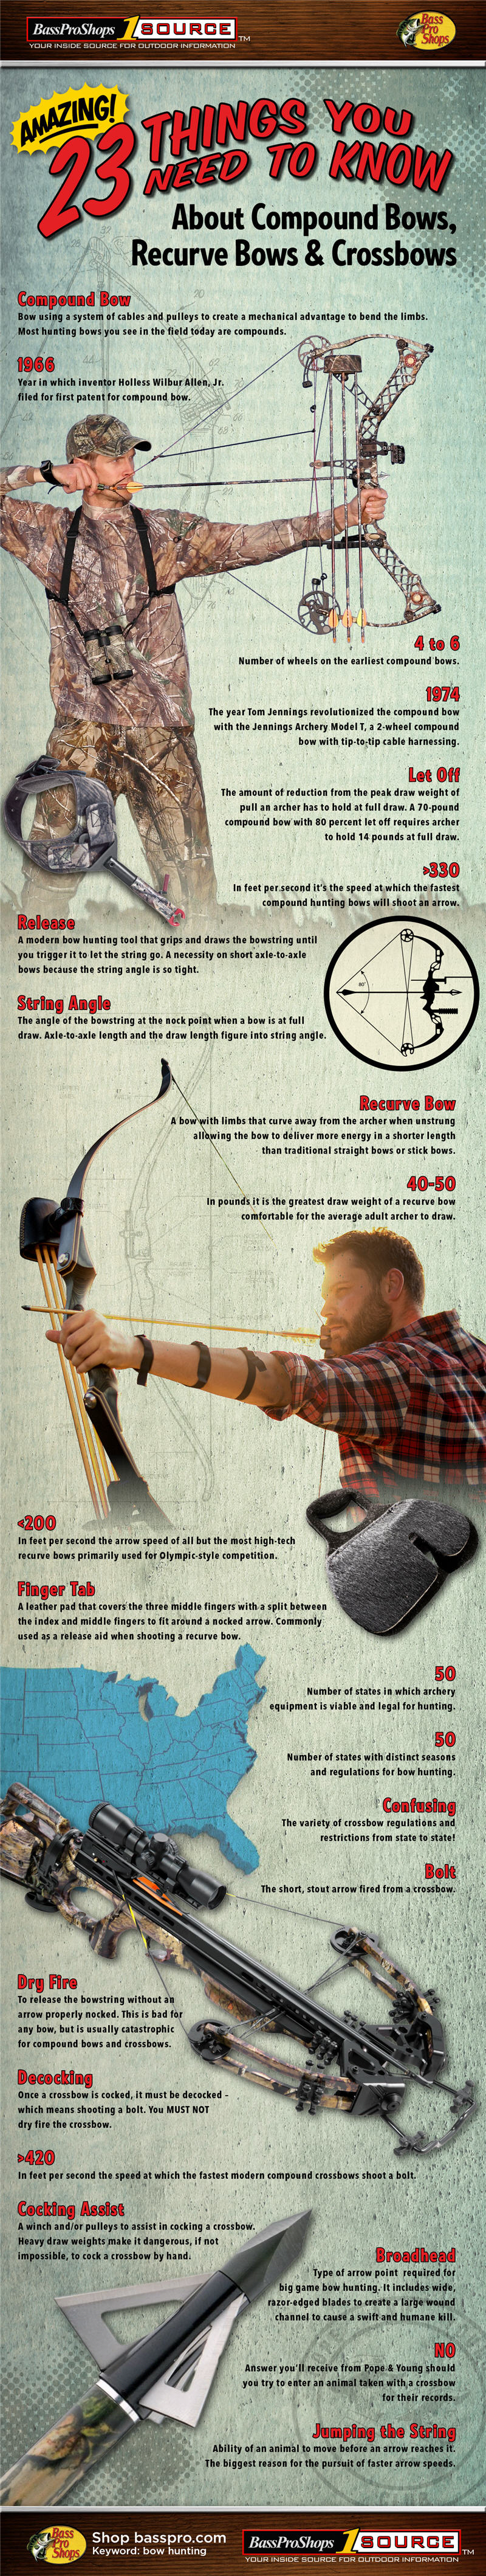 Infographic 23 things about compound bows, recurve bows & crossbows